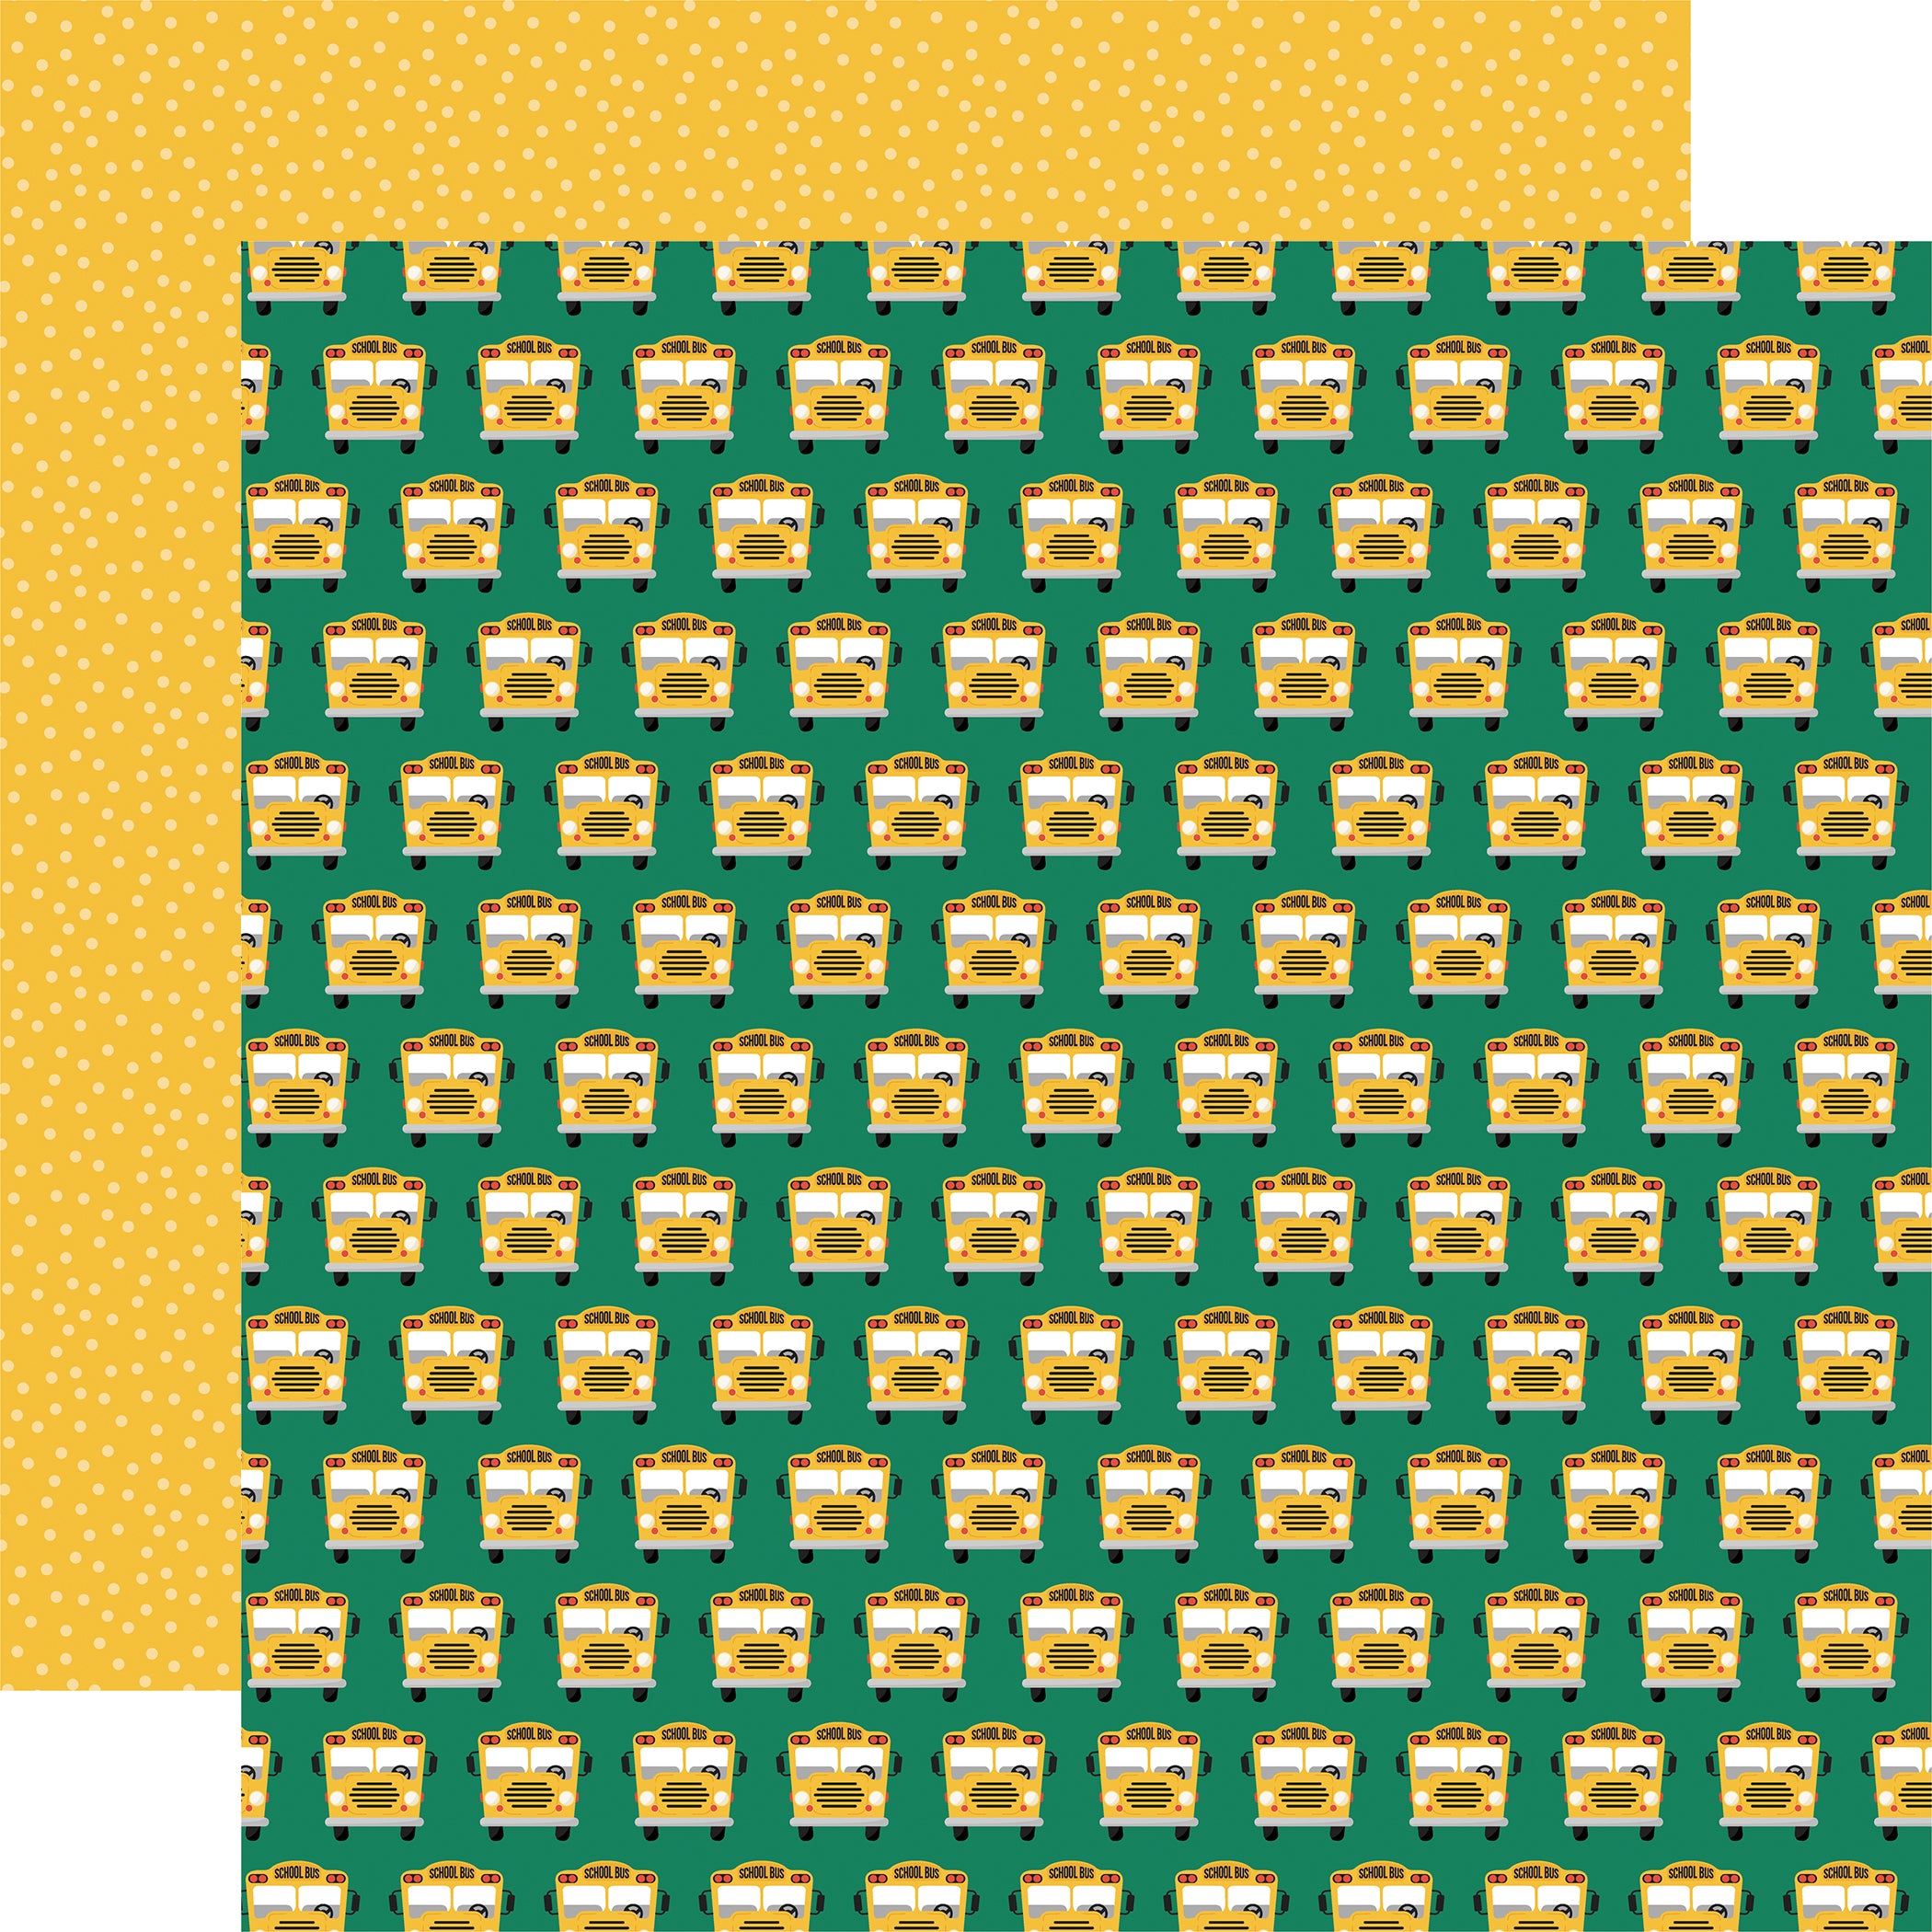 Off to School Collection School Bus Ride 12 x 12 Double-Sided Scrapbook Paper by Echo Park Paper